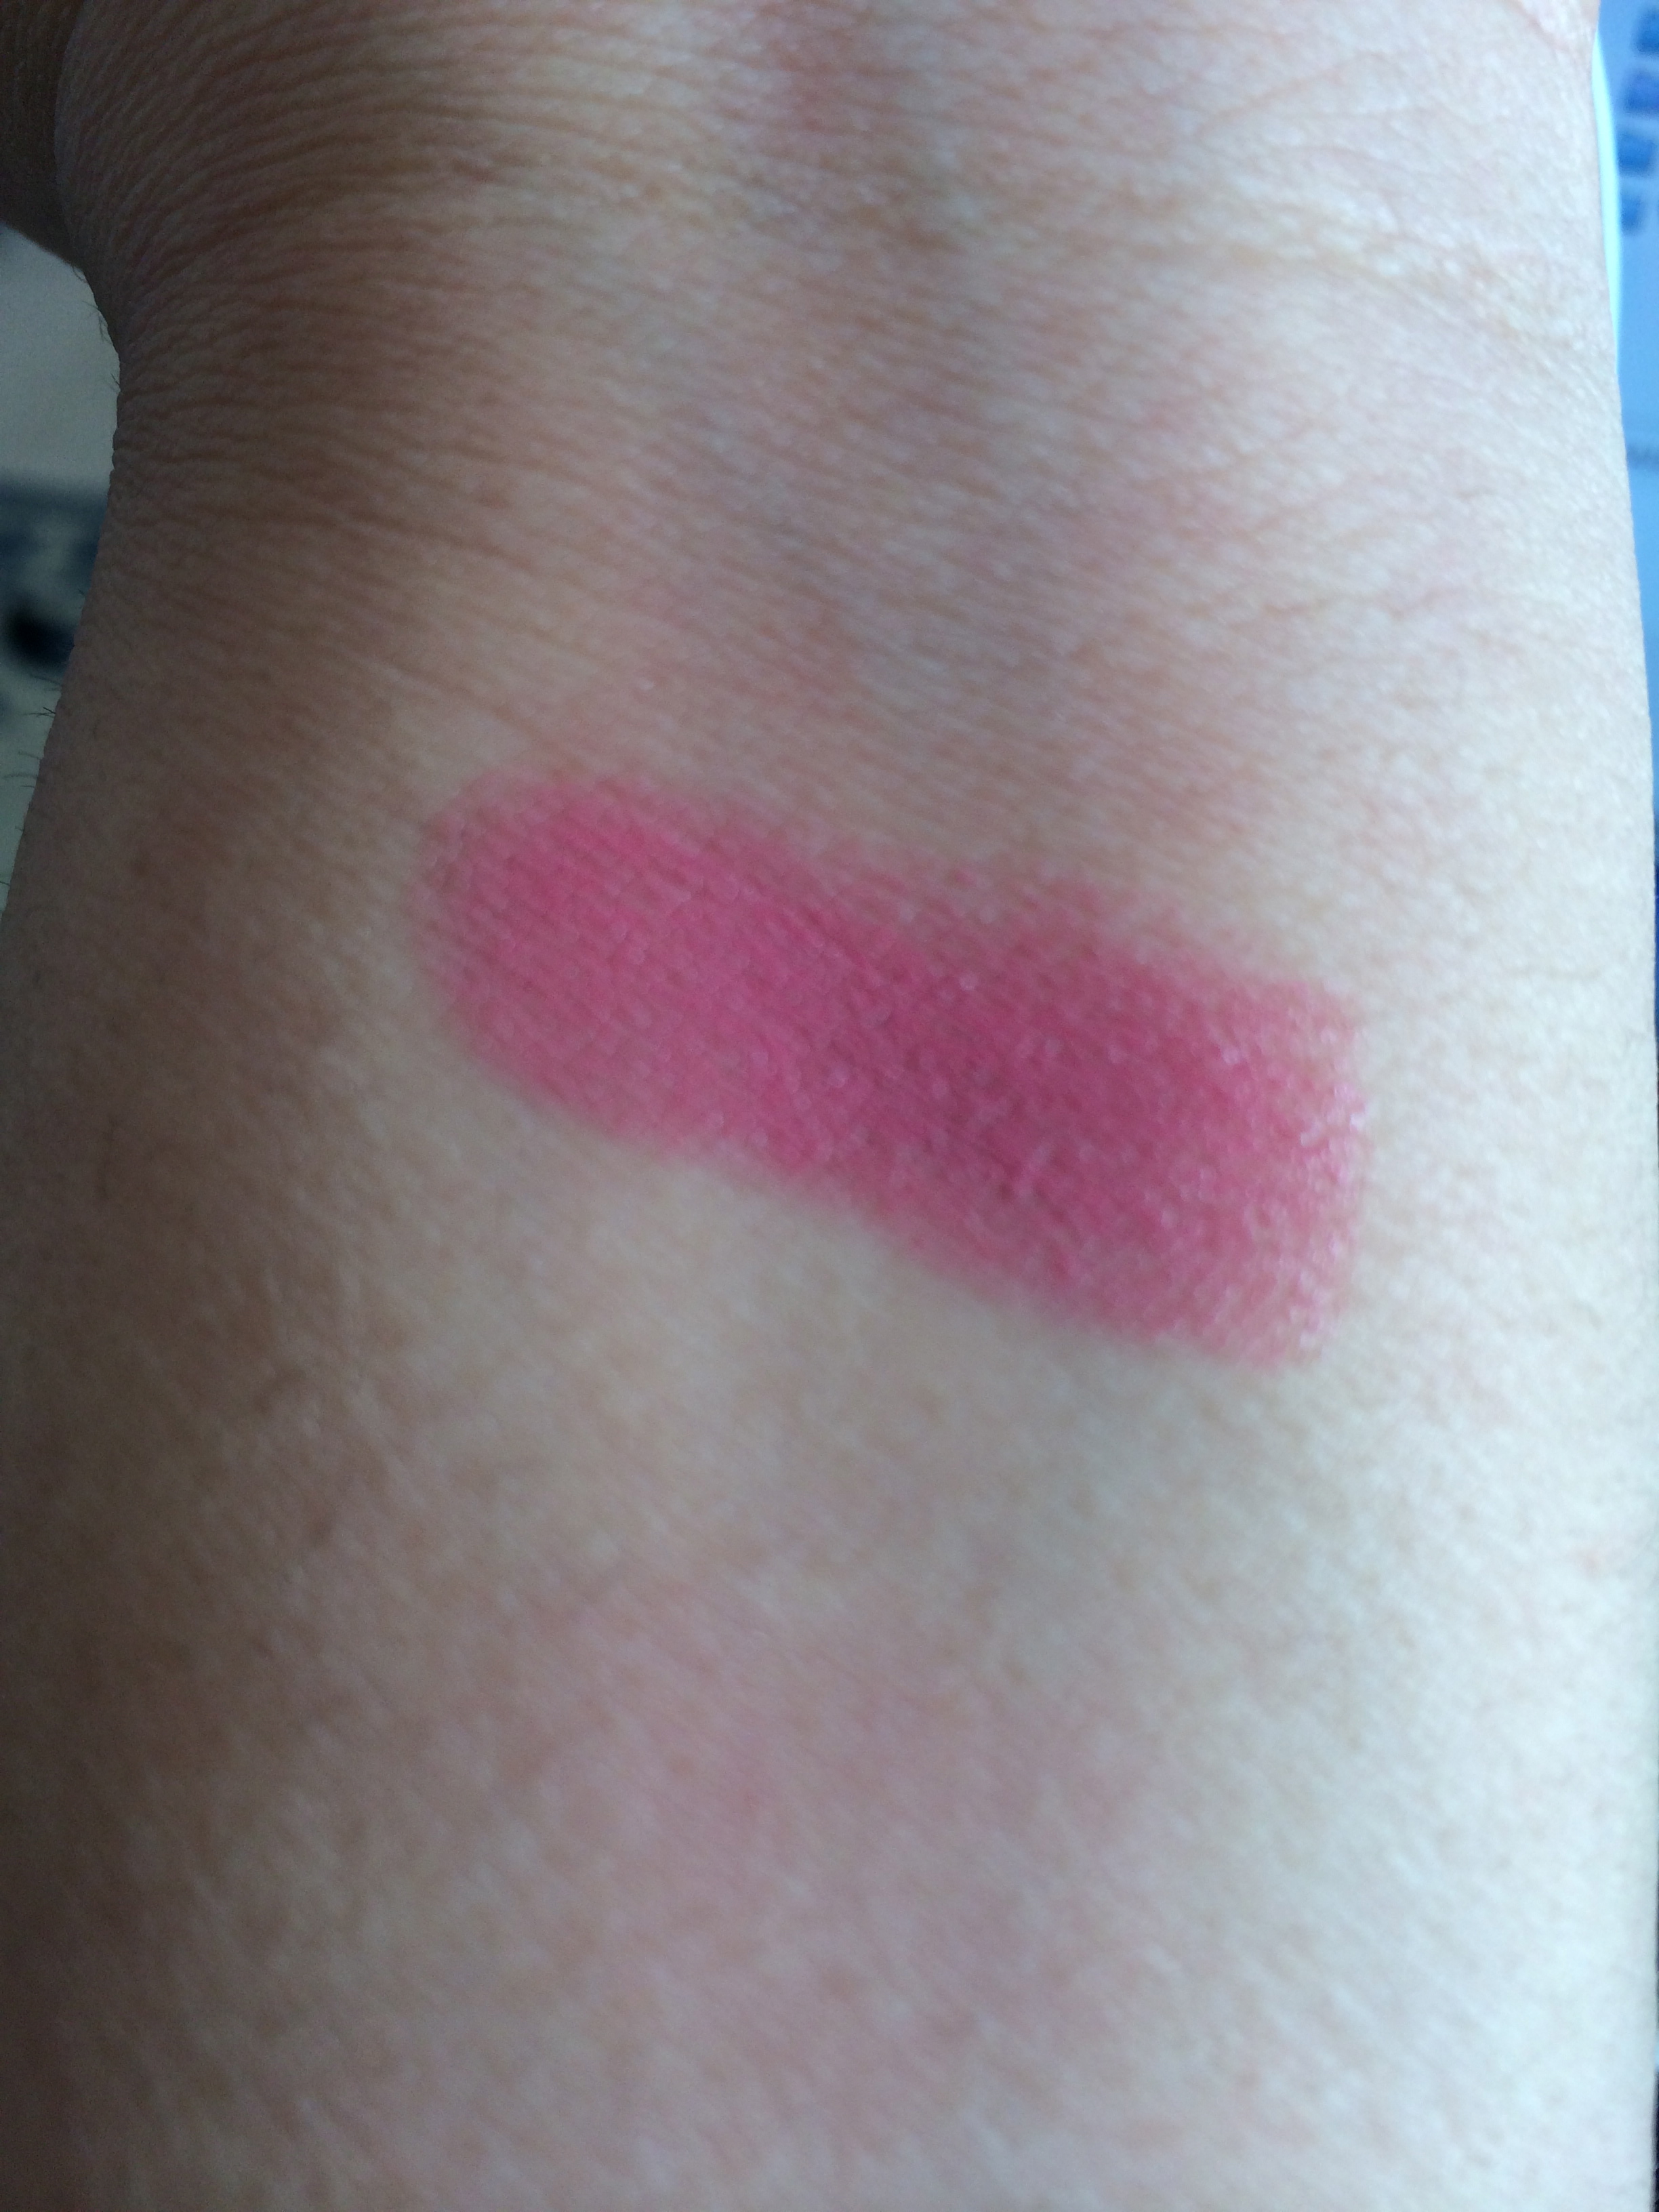 Chanel Rouge Allure Lipstick Intense Color, 91 SEDUISANTE Ingredients and  Reviews